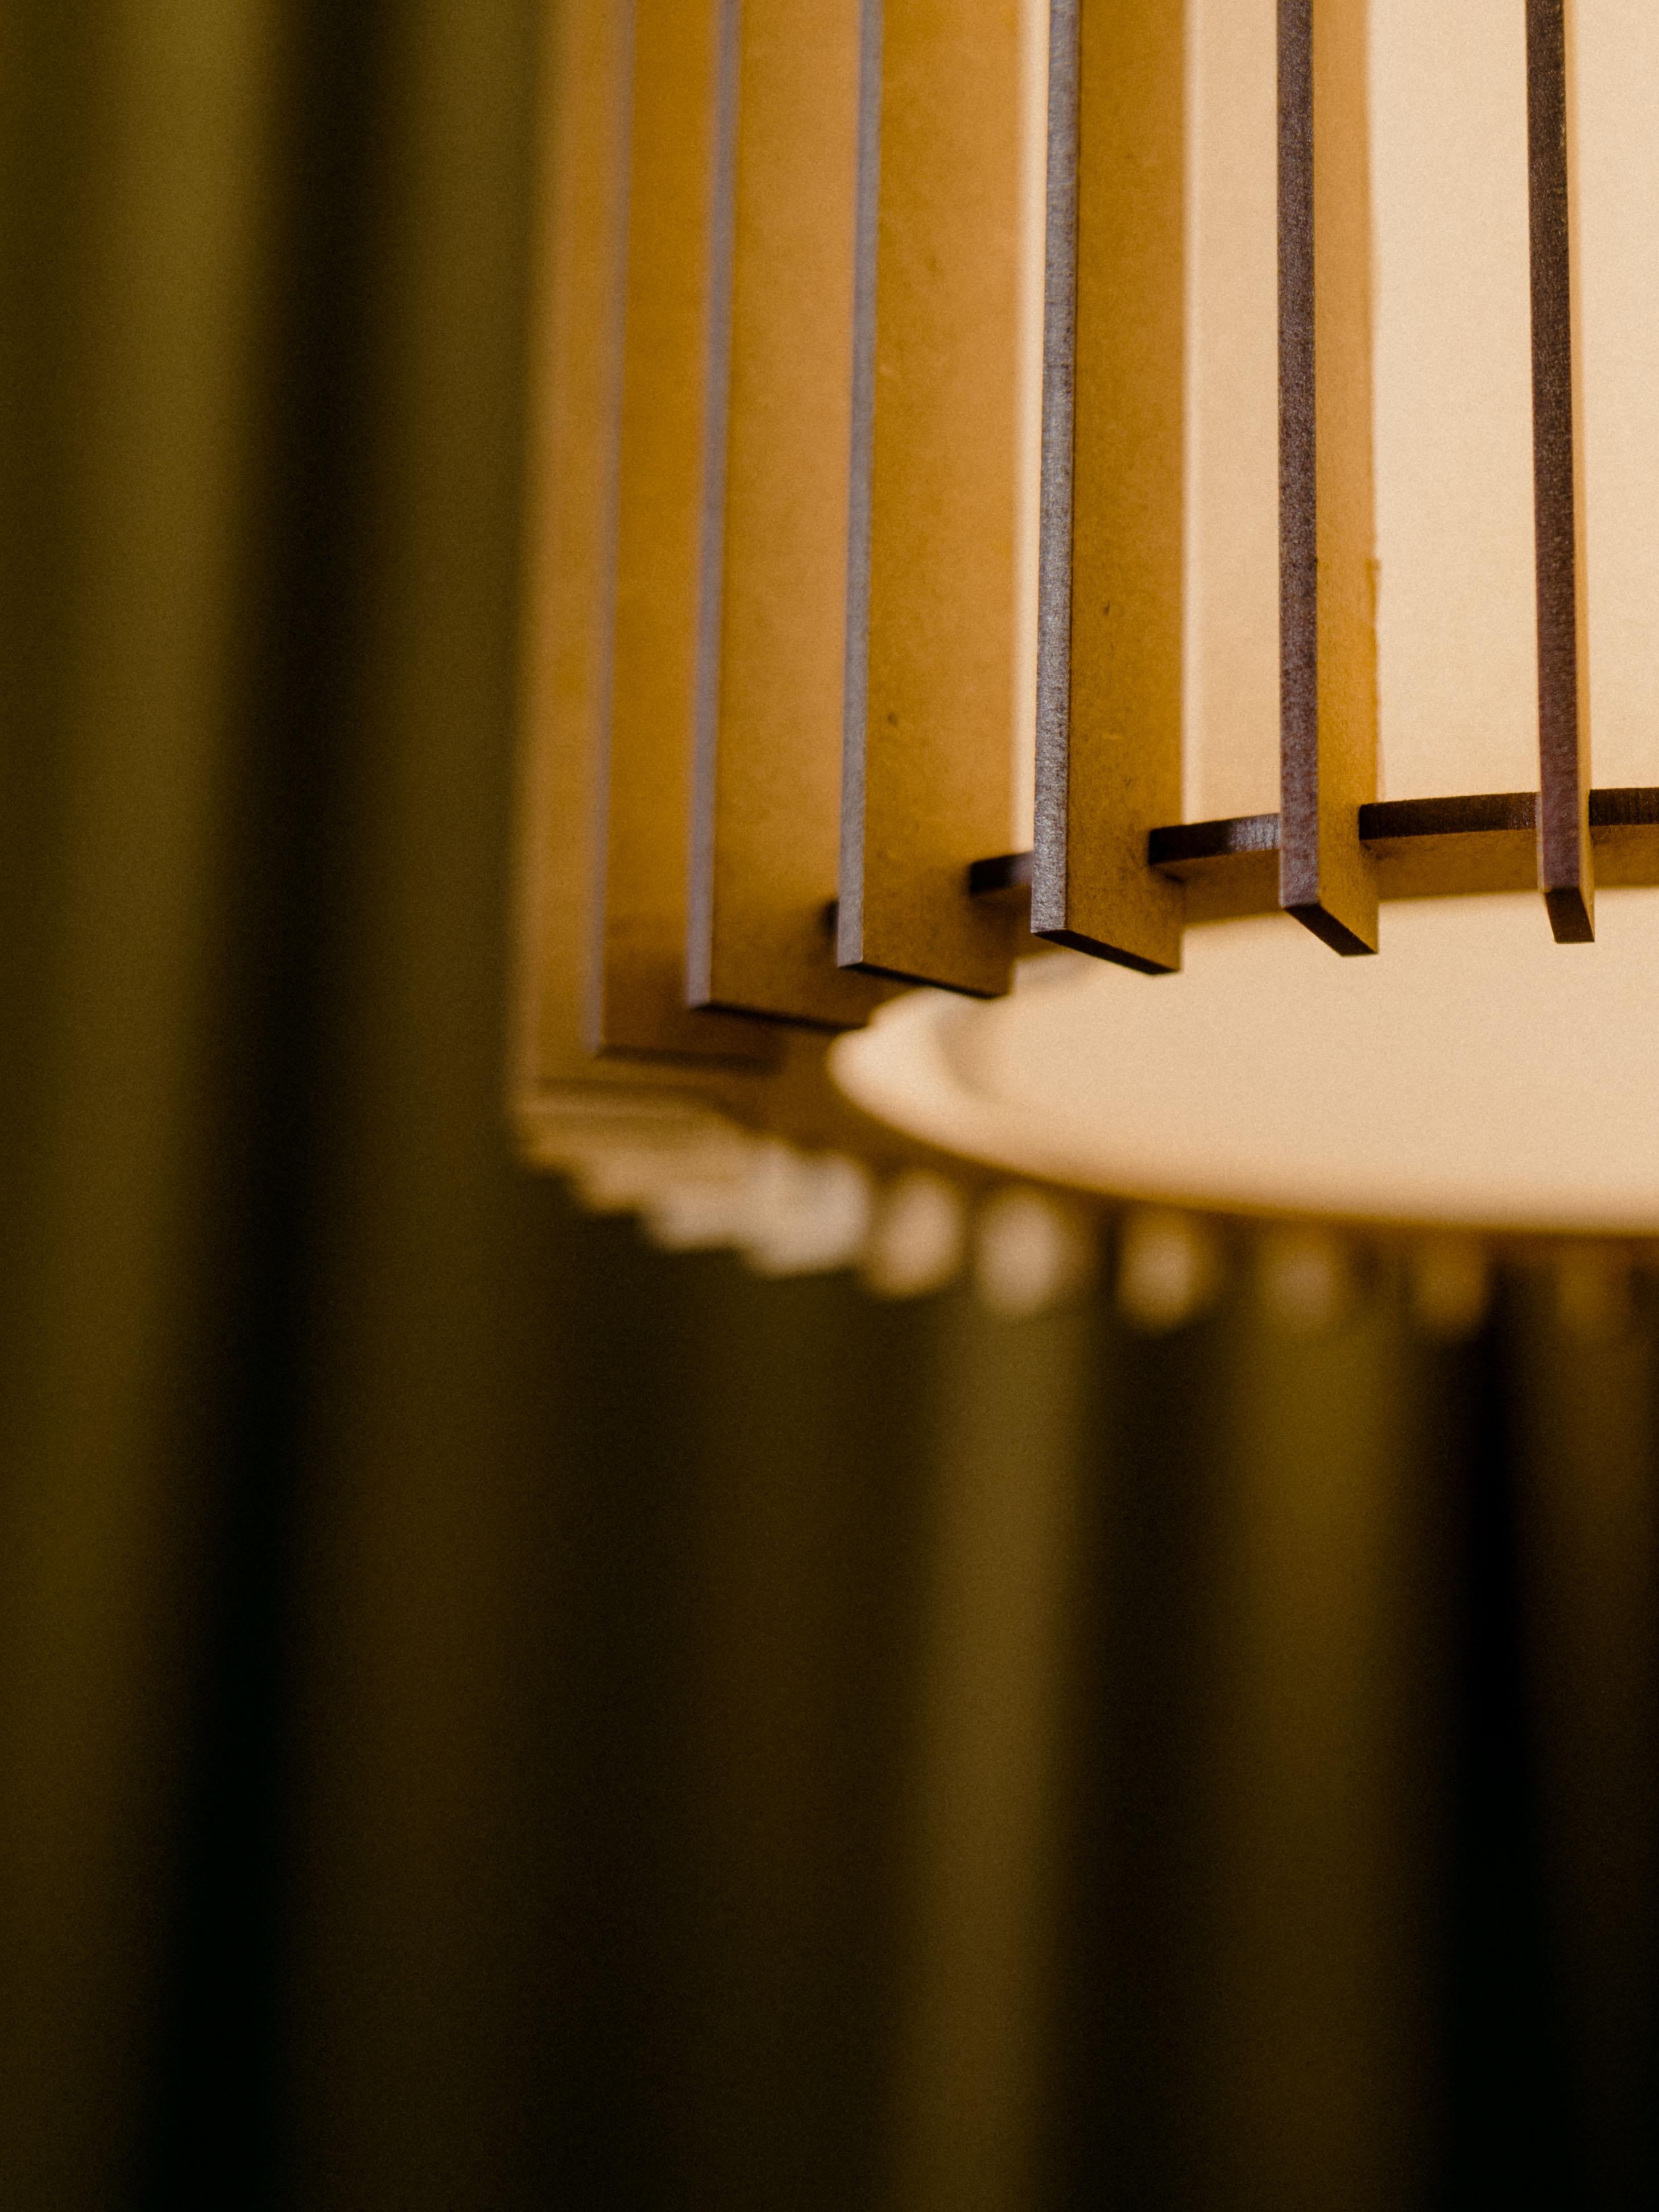 Suau lamps are designed and manufactured by Mediterranean Objects in Barcelona, Spain. 

They have an external screen made of MDF wooden slats, laser cut and assembled one by one, in such a way that they create two different visual textures, one